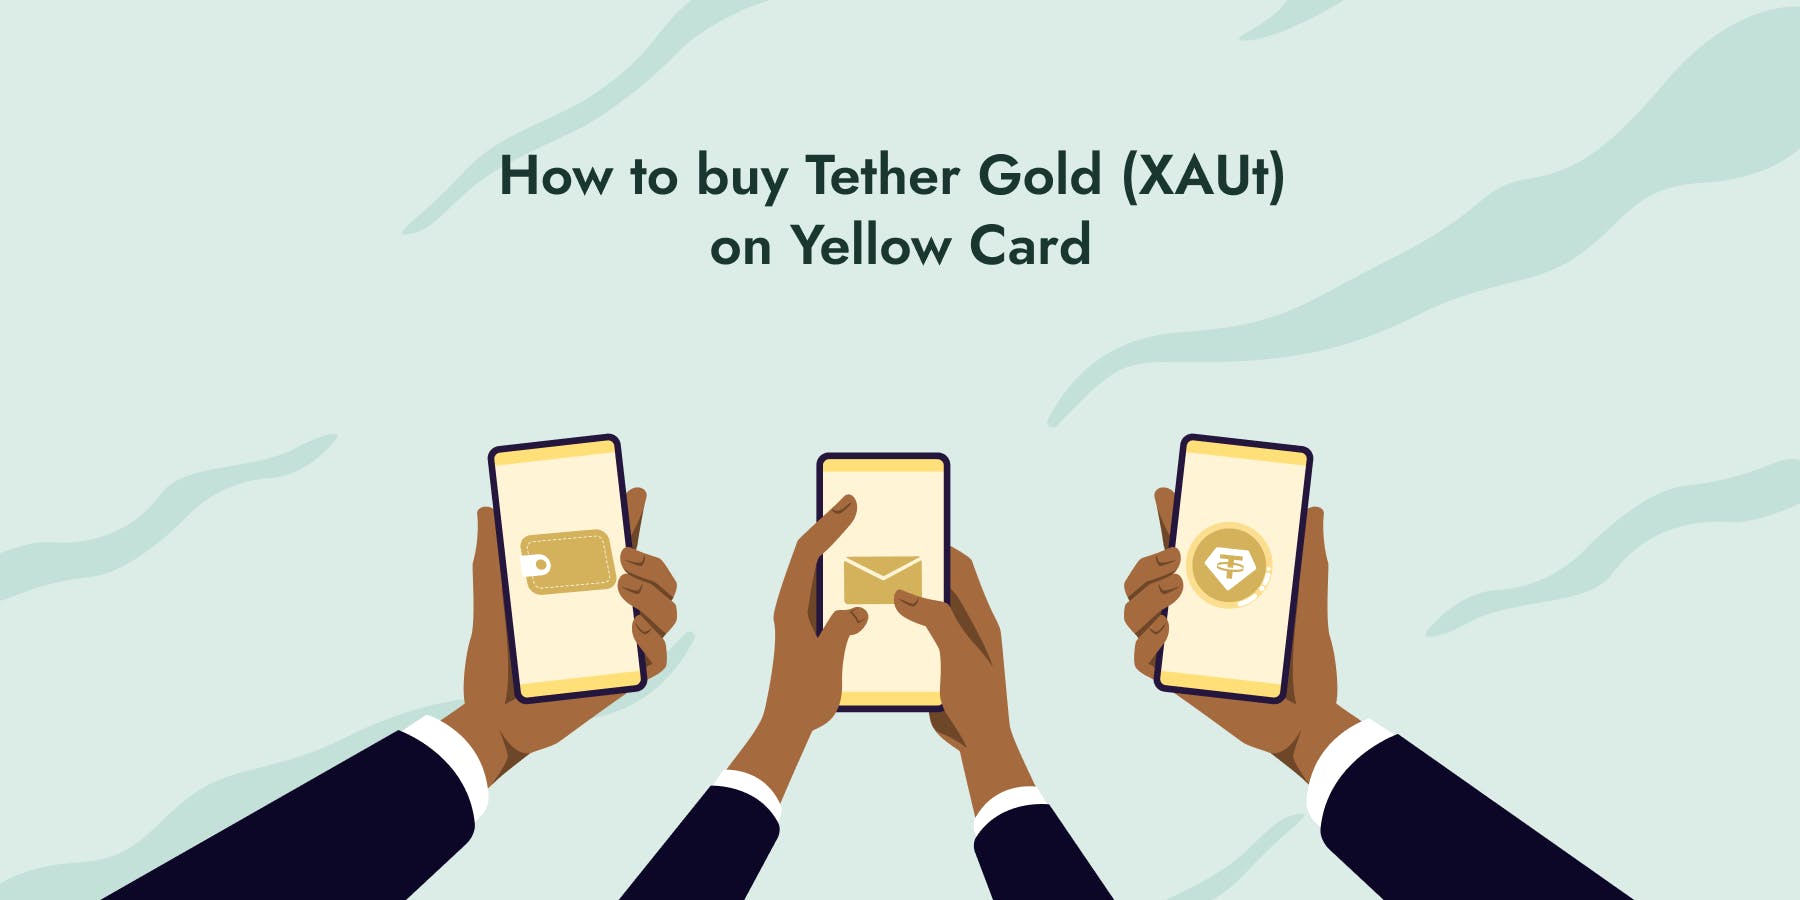 How to Buy Tether Gold (XAUt) on Yellow Card